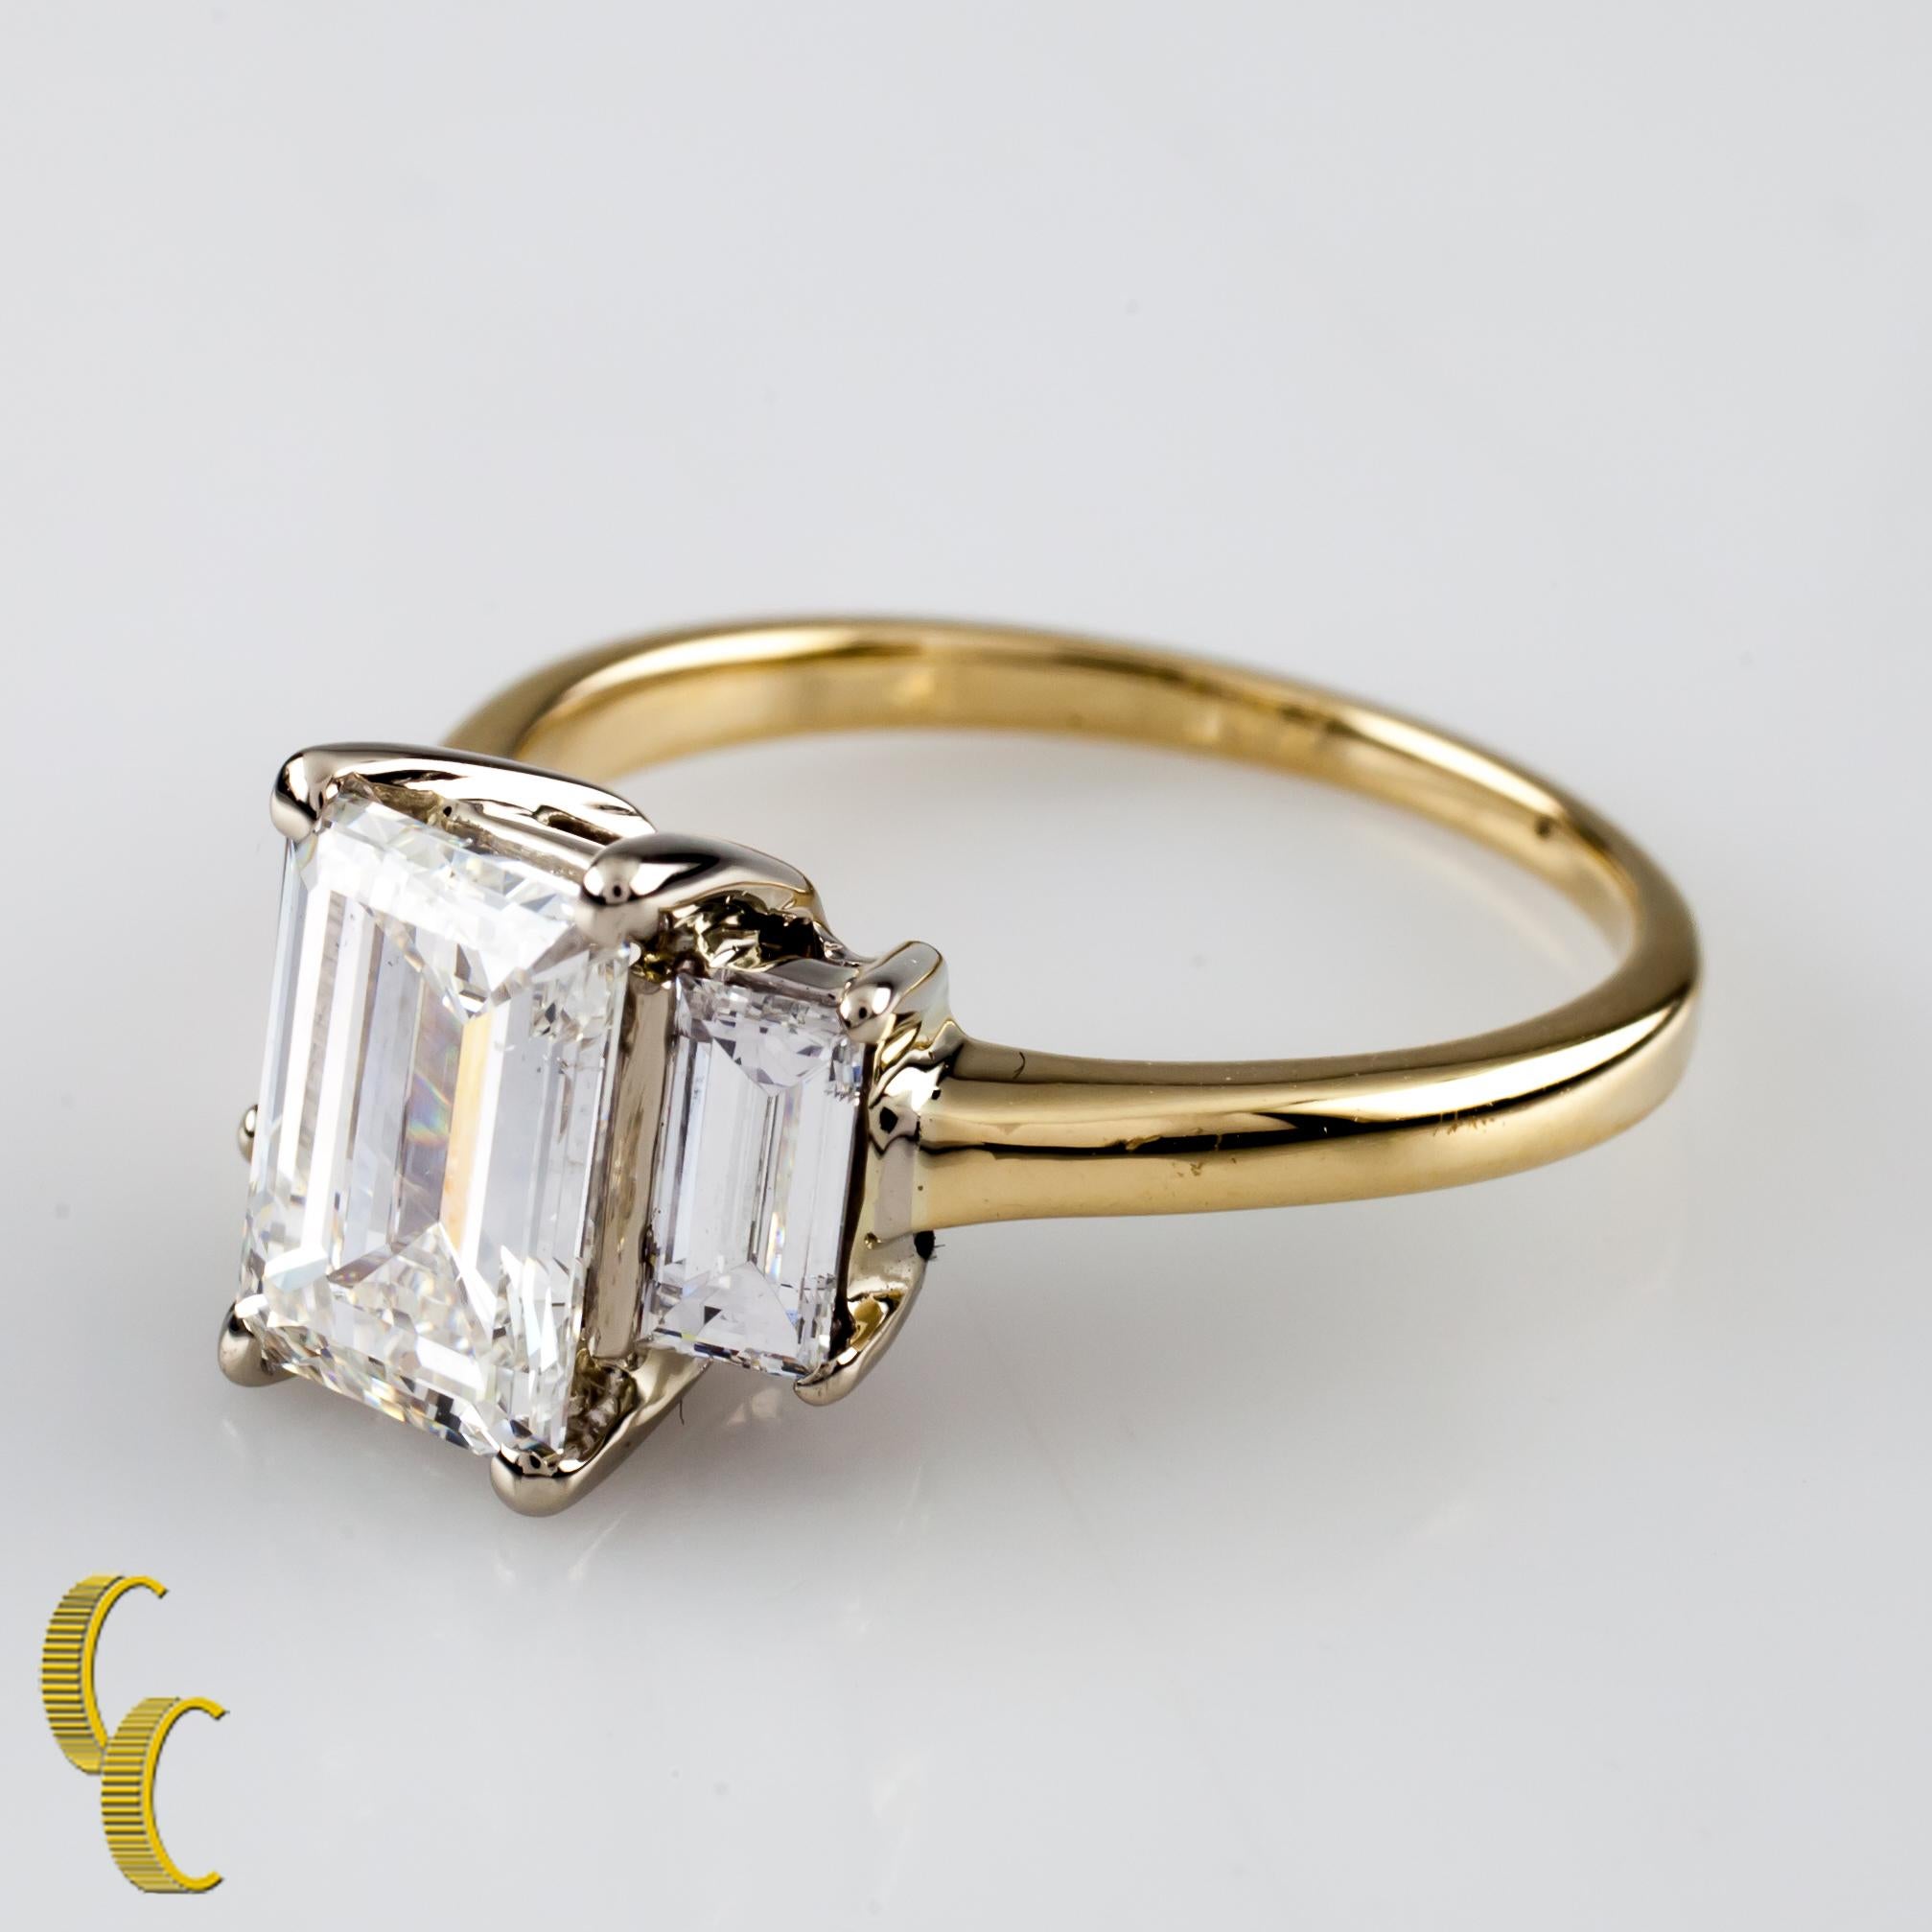 Gorgeous Three-Stone 14k Yellow Gold Engagement Ring
Center Stone: 
Cut: Emerald Cut
Color Grade: G
Clarity: SI-1
Carat Weight: 1.52 carats
Two .40 ct / G Color / VS1 - VS2 Emerald Cut Accent Stones (Total Diamond Weight of all Stones = 2.32